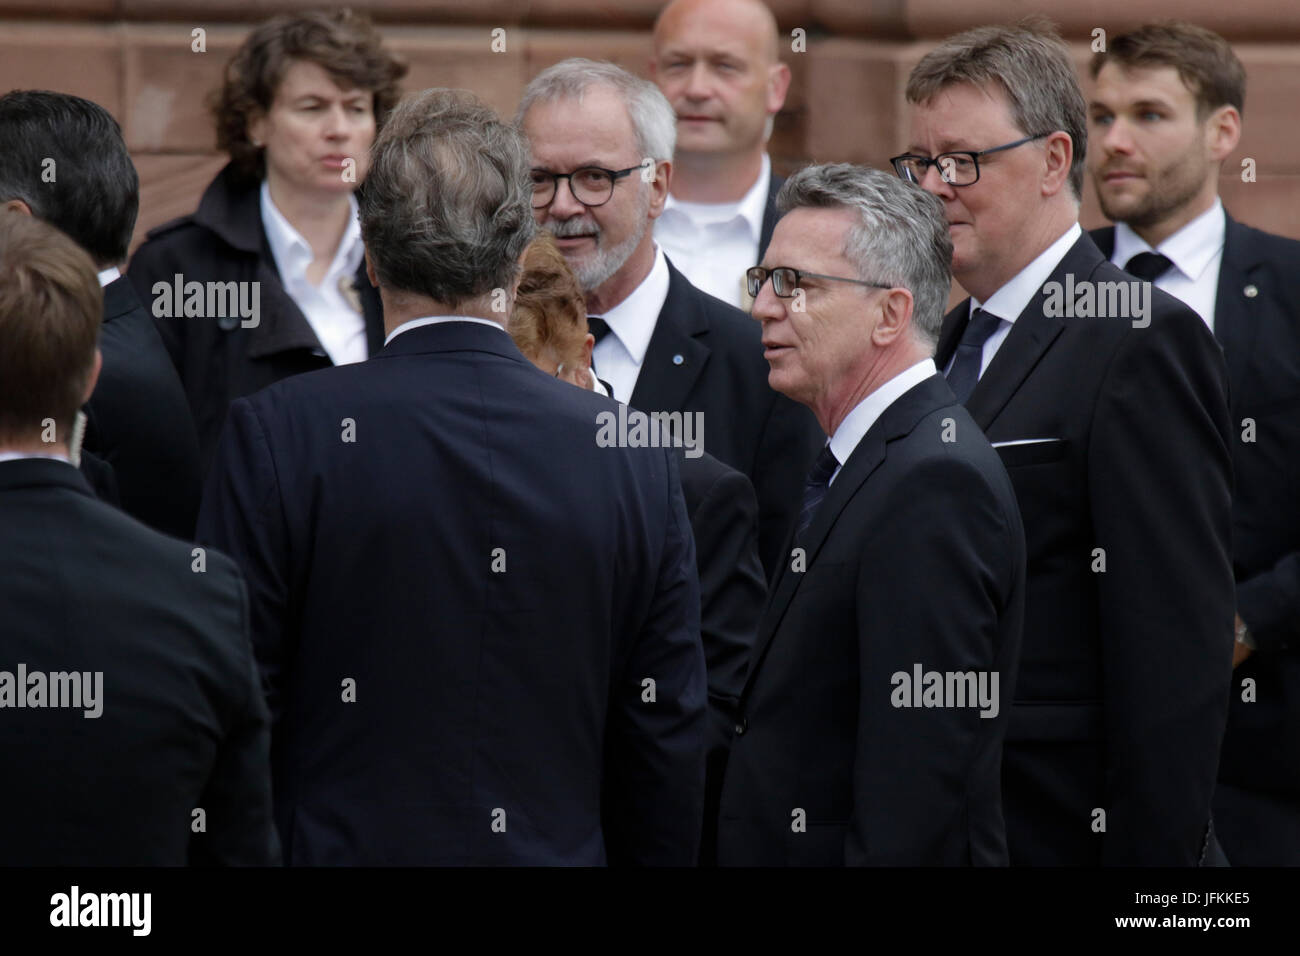 Speyer, Germany. 1st July 2017. Thomas de Maiziere (right), the German Minister of the Interior, arrives at the Speyer Cathedral. A funeral mass for the former German Chancellor Helmut Kohl was held in the Cathedral of Speyer. it was attended by over 100 invited guests and several thousand people followed the mass outside the Cathedral. Stock Photo